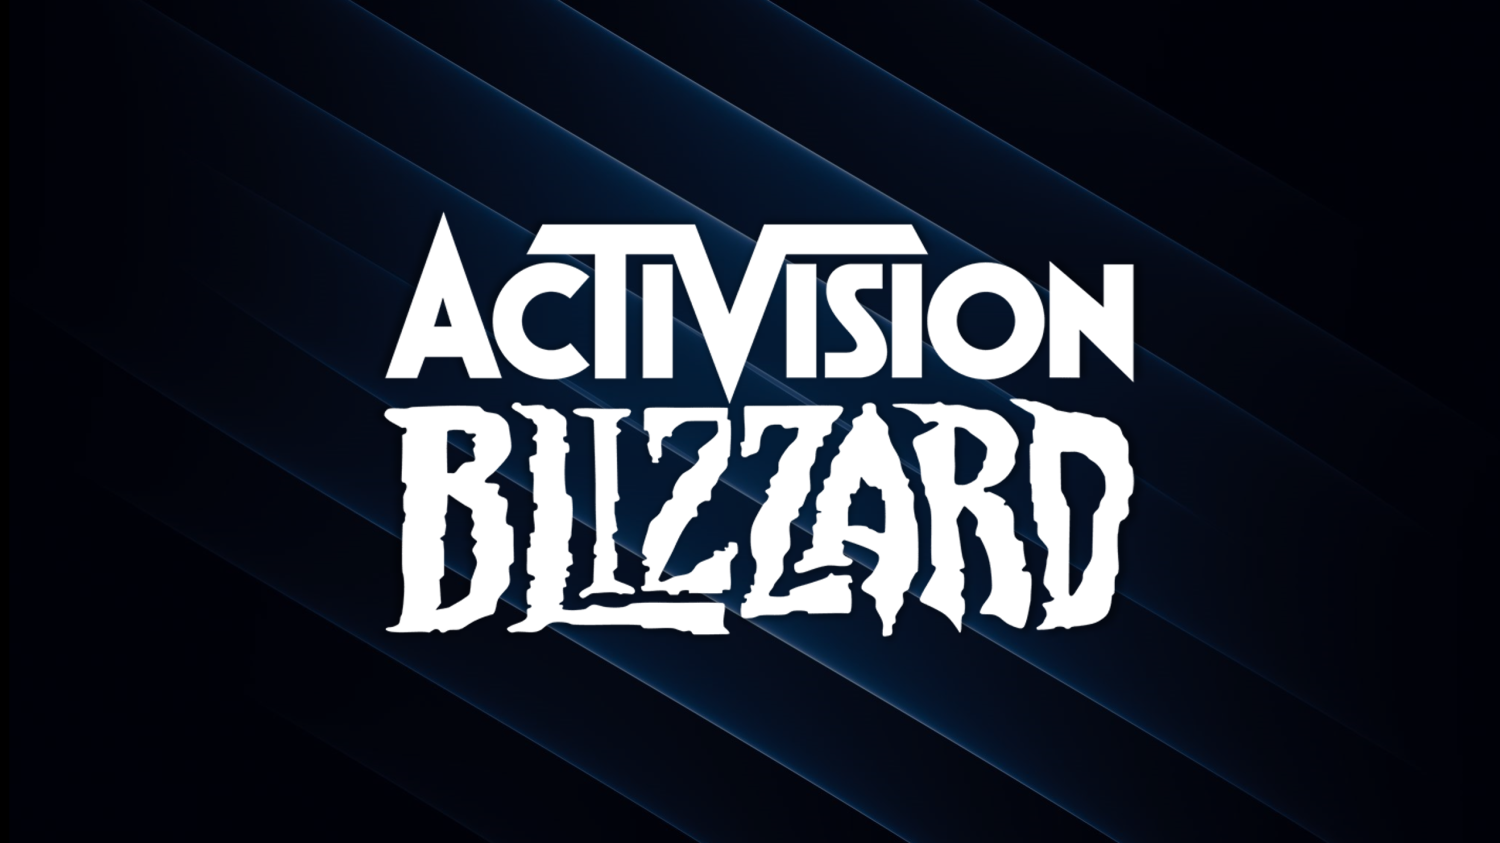 Singleplayer games are extremely un-important for Activision-Blizzard